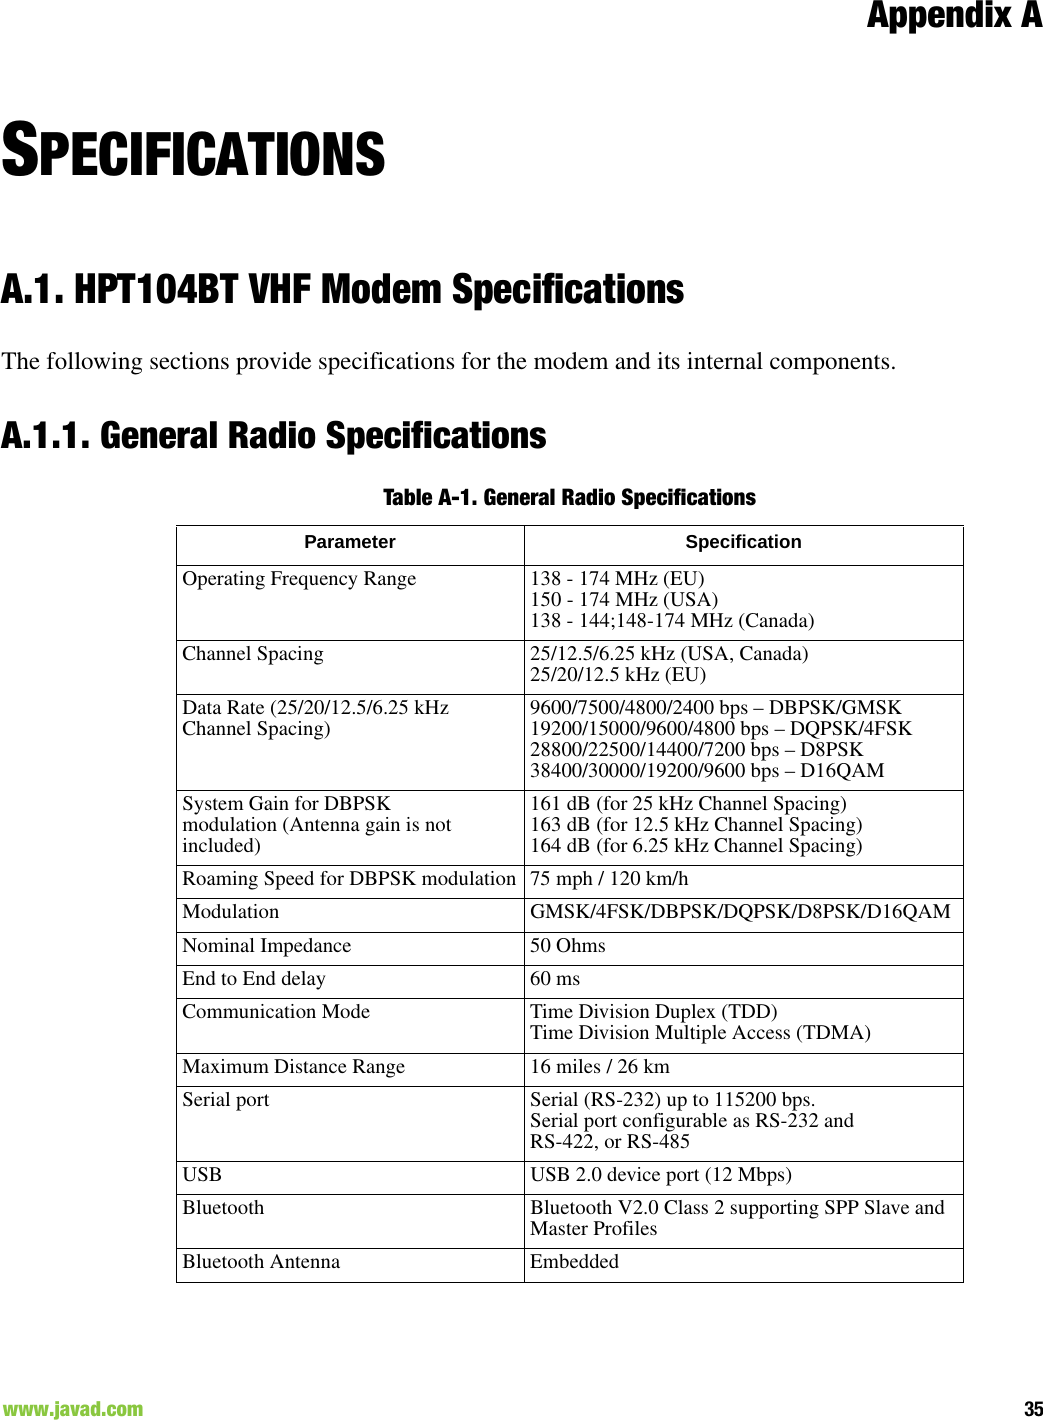 Appendix A35www.javad.com                                                                                                                                              SPECIFICATIONSA.1. HPT104BT VHF Modem SpecificationsThe following sections provide specifications for the modem and its internal components.A.1.1. General Radio SpecificationsTable A-1. General Radio Specifications Parameter SpecificationOperating Frequency Range 138 - 174 MHz (EU)150 - 174 MHz (USA)138 - 144;148-174 MHz (Canada)Channel Spacing 25/12.5/6.25 kHz (USA, Canada)25/20/12.5 kHz (EU)Data Rate (25/20/12.5/6.25 kHz Channel Spacing) 9600/7500/4800/2400 bps – DBPSK/GMSK19200/15000/9600/4800 bps – DQPSK/4FSK28800/22500/14400/7200 bps – D8PSK38400/30000/19200/9600 bps – D16QAMSystem Gain for DBPSKmodulation (Antenna gain is notincluded)161 dB (for 25 kHz Channel Spacing)163 dB (for 12.5 kHz Channel Spacing)164 dB (for 6.25 kHz Channel Spacing)Roaming Speed for DBPSK modulation 75 mph / 120 km/hModulation GMSK/4FSK/DBPSK/DQPSK/D8PSK/D16QAM Nominal Impedance 50 OhmsEnd to End delay 60 msCommunication Mode Time Division Duplex (TDD)Time Division Multiple Access (TDMA)Maximum Distance Range 16 miles / 26 kmSerial port Serial (RS-232) up to 115200 bps.Serial port configurable as RS-232 and RS-422, or RS-485USB USB 2.0 device port (12 Mbps)Bluetooth Bluetooth V2.0 Class 2 supporting SPP Slave and Master ProfilesBluetooth Antenna Embedded